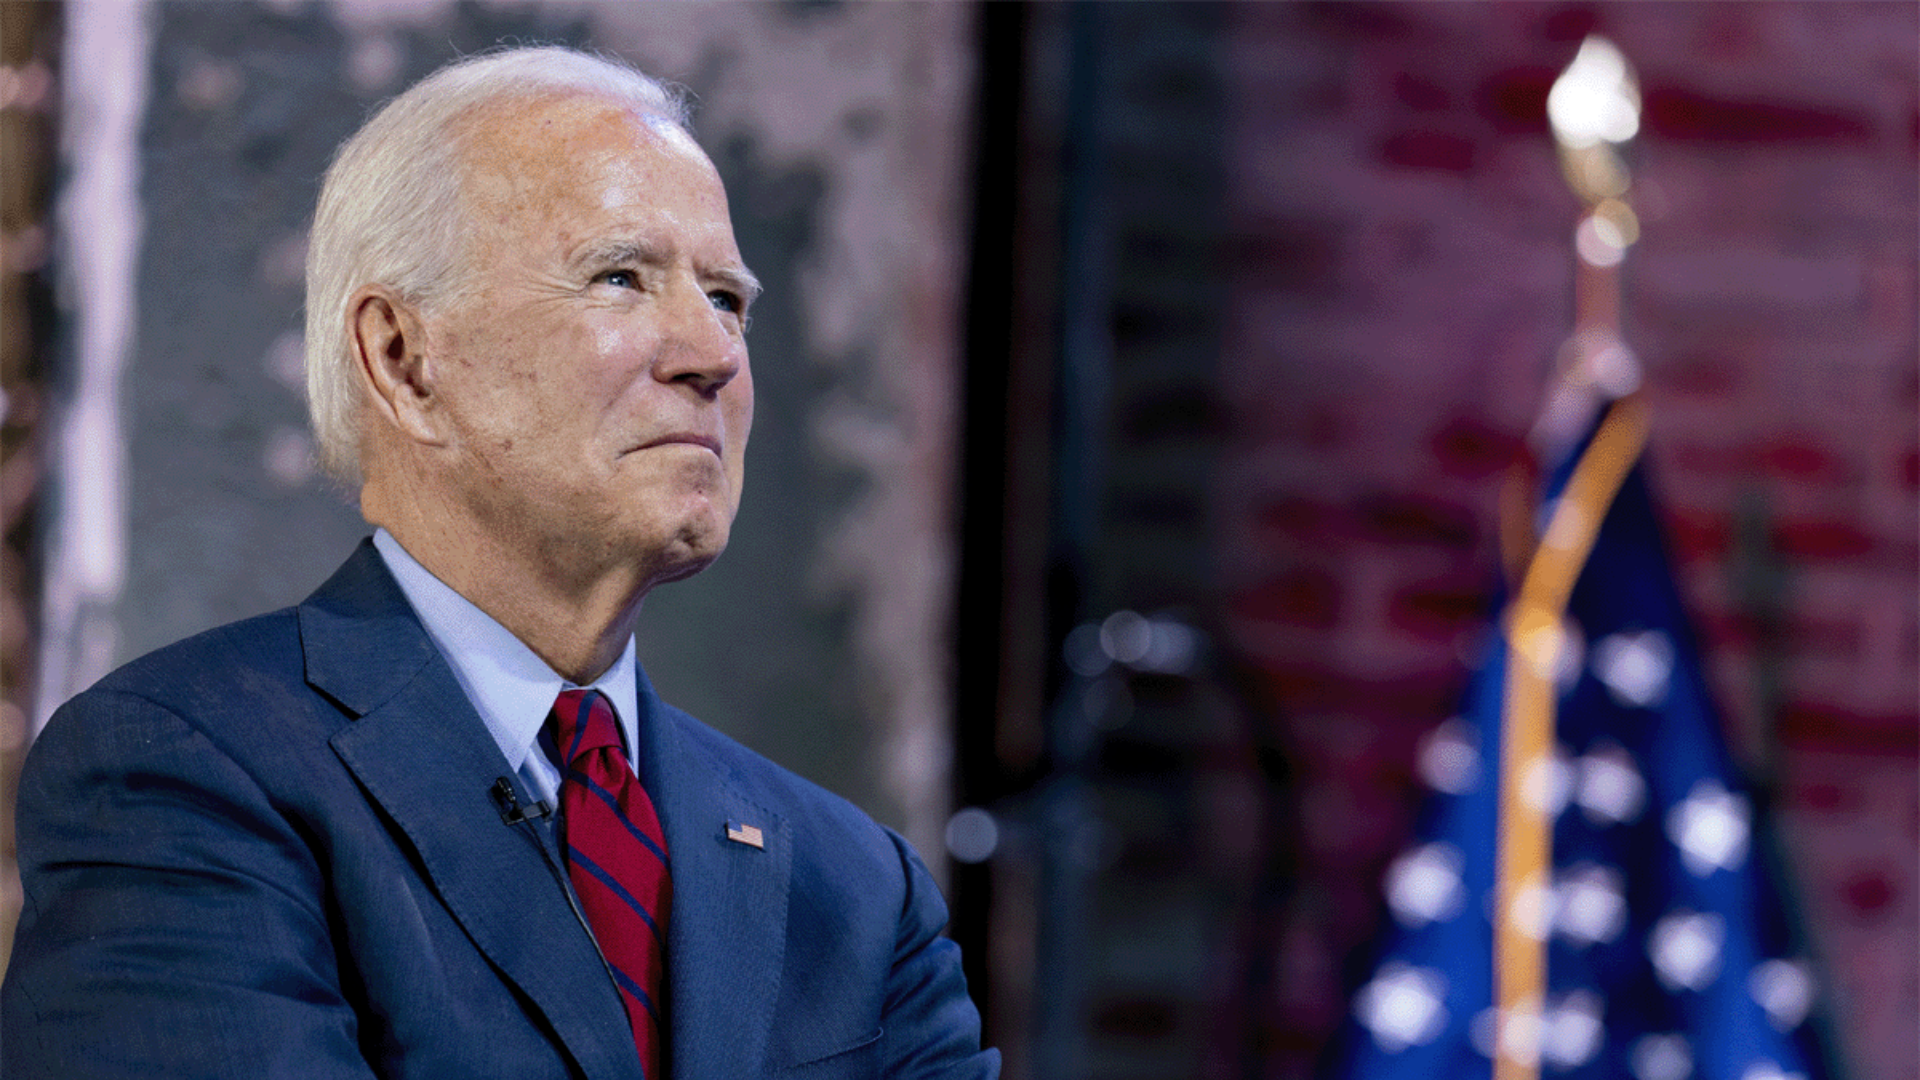 Biden Issues Apology To Zelenskyy For Hold-Up In Passing Aid Package To Ukraine